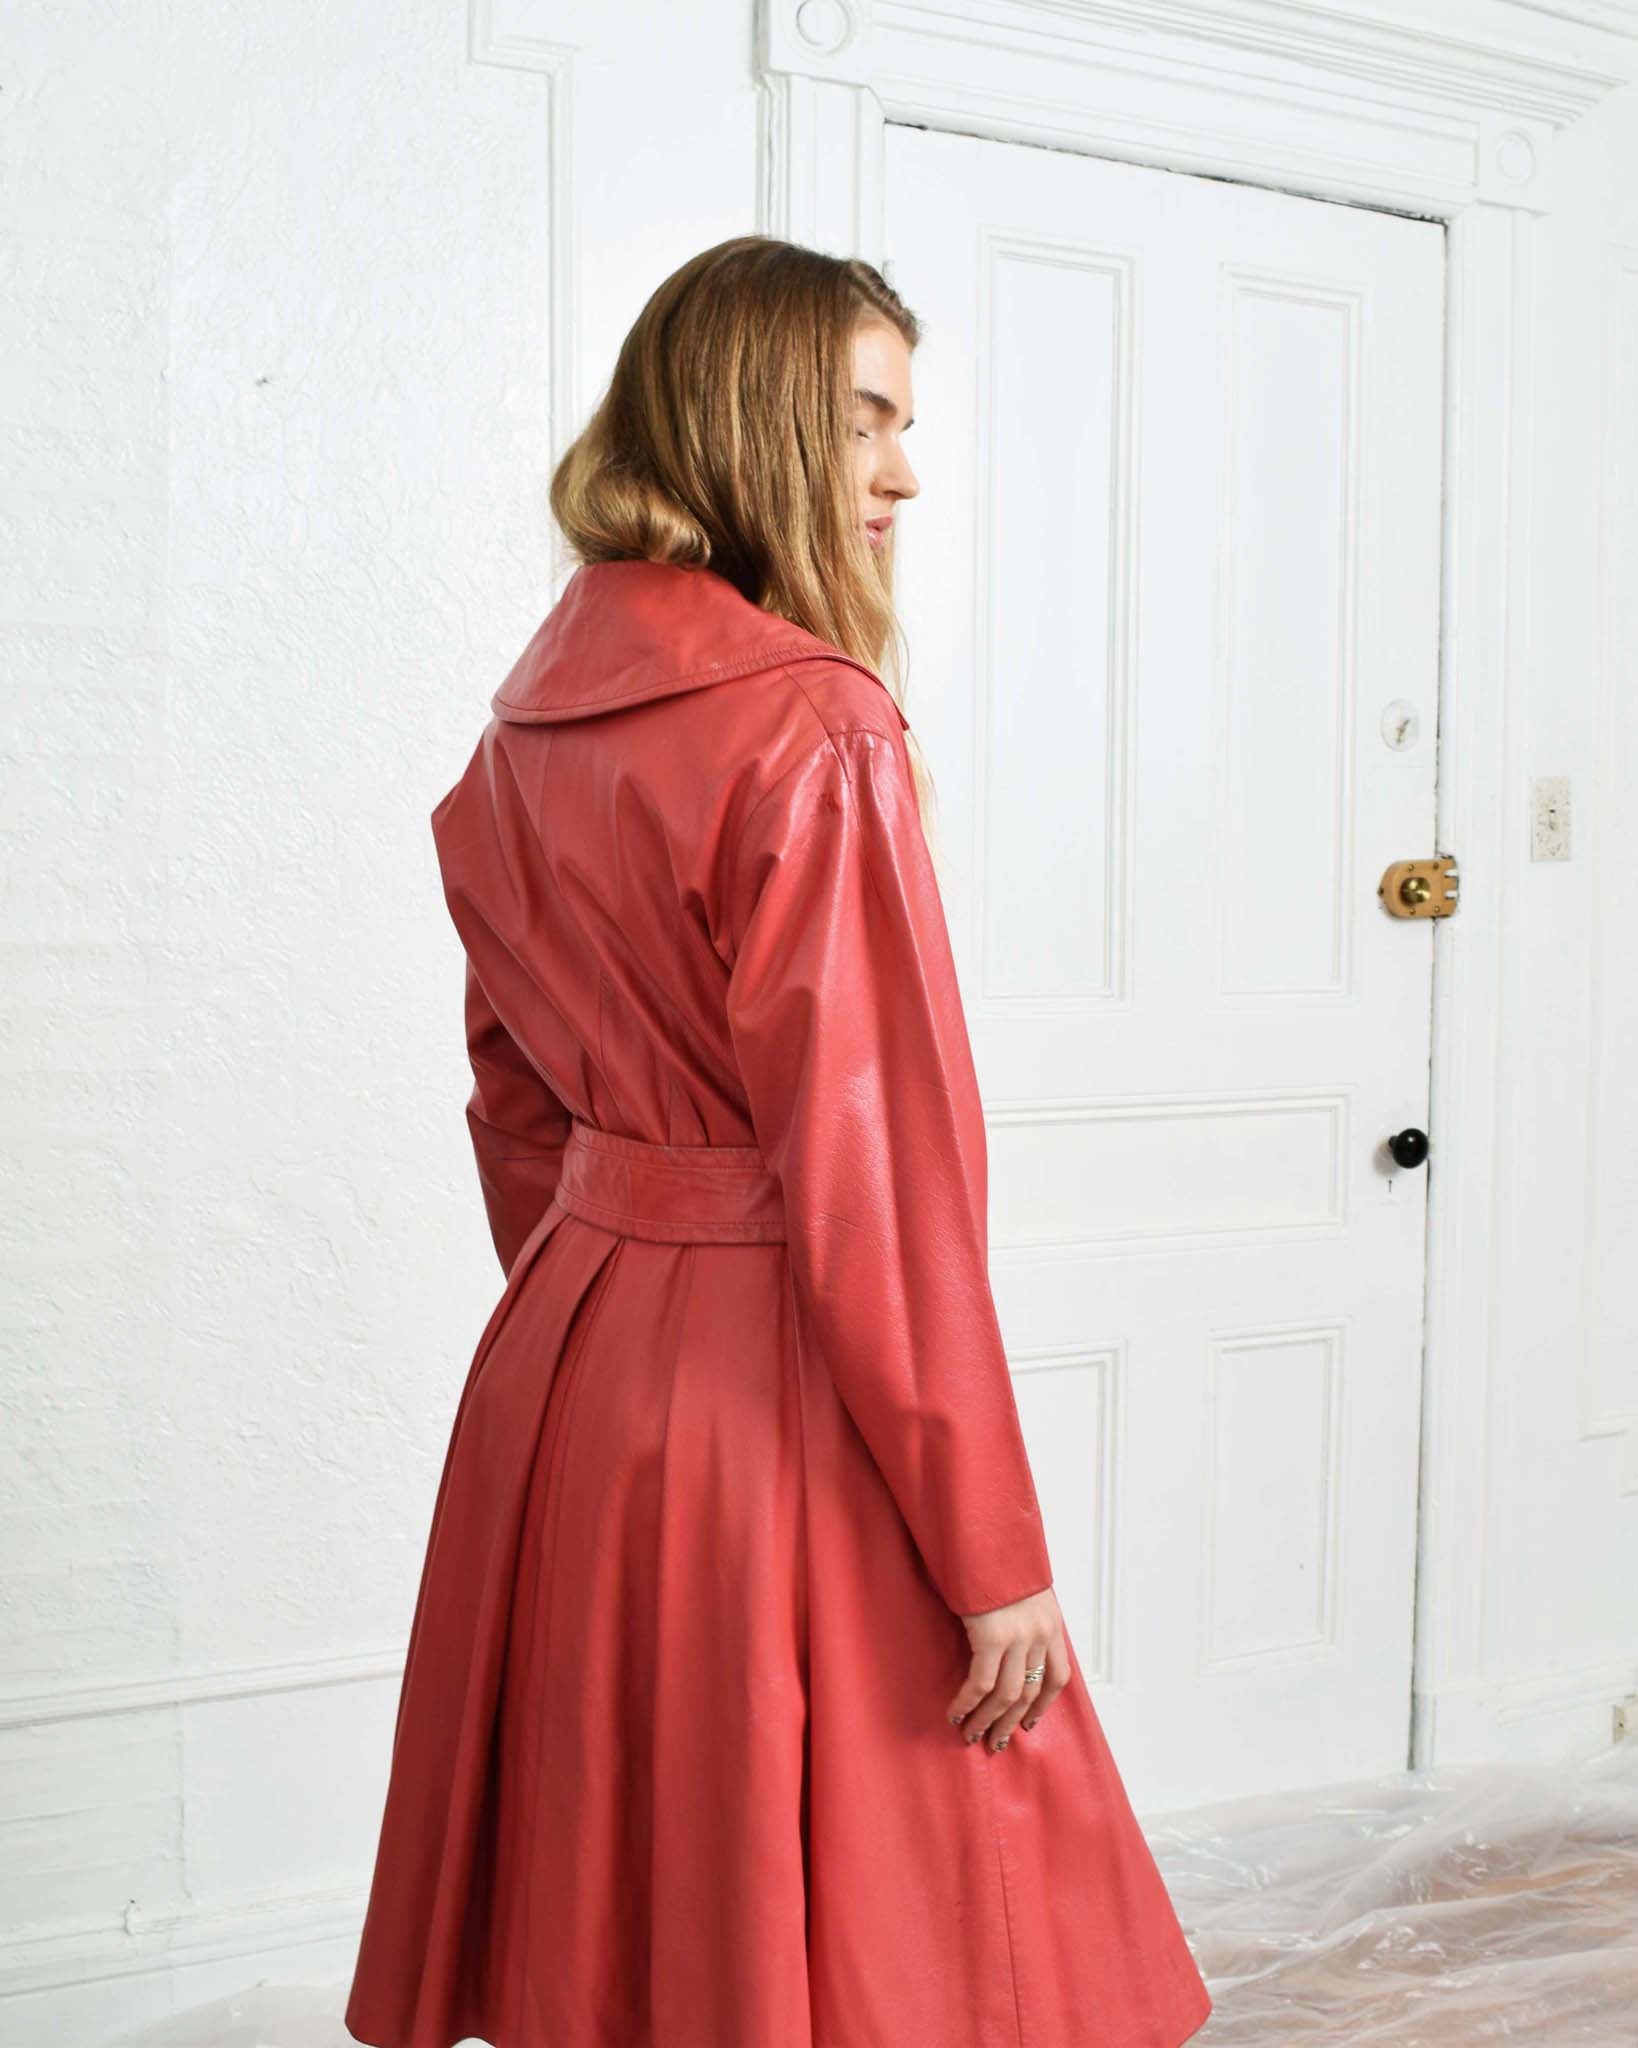 Vintage 1970s Pink Leather Trench